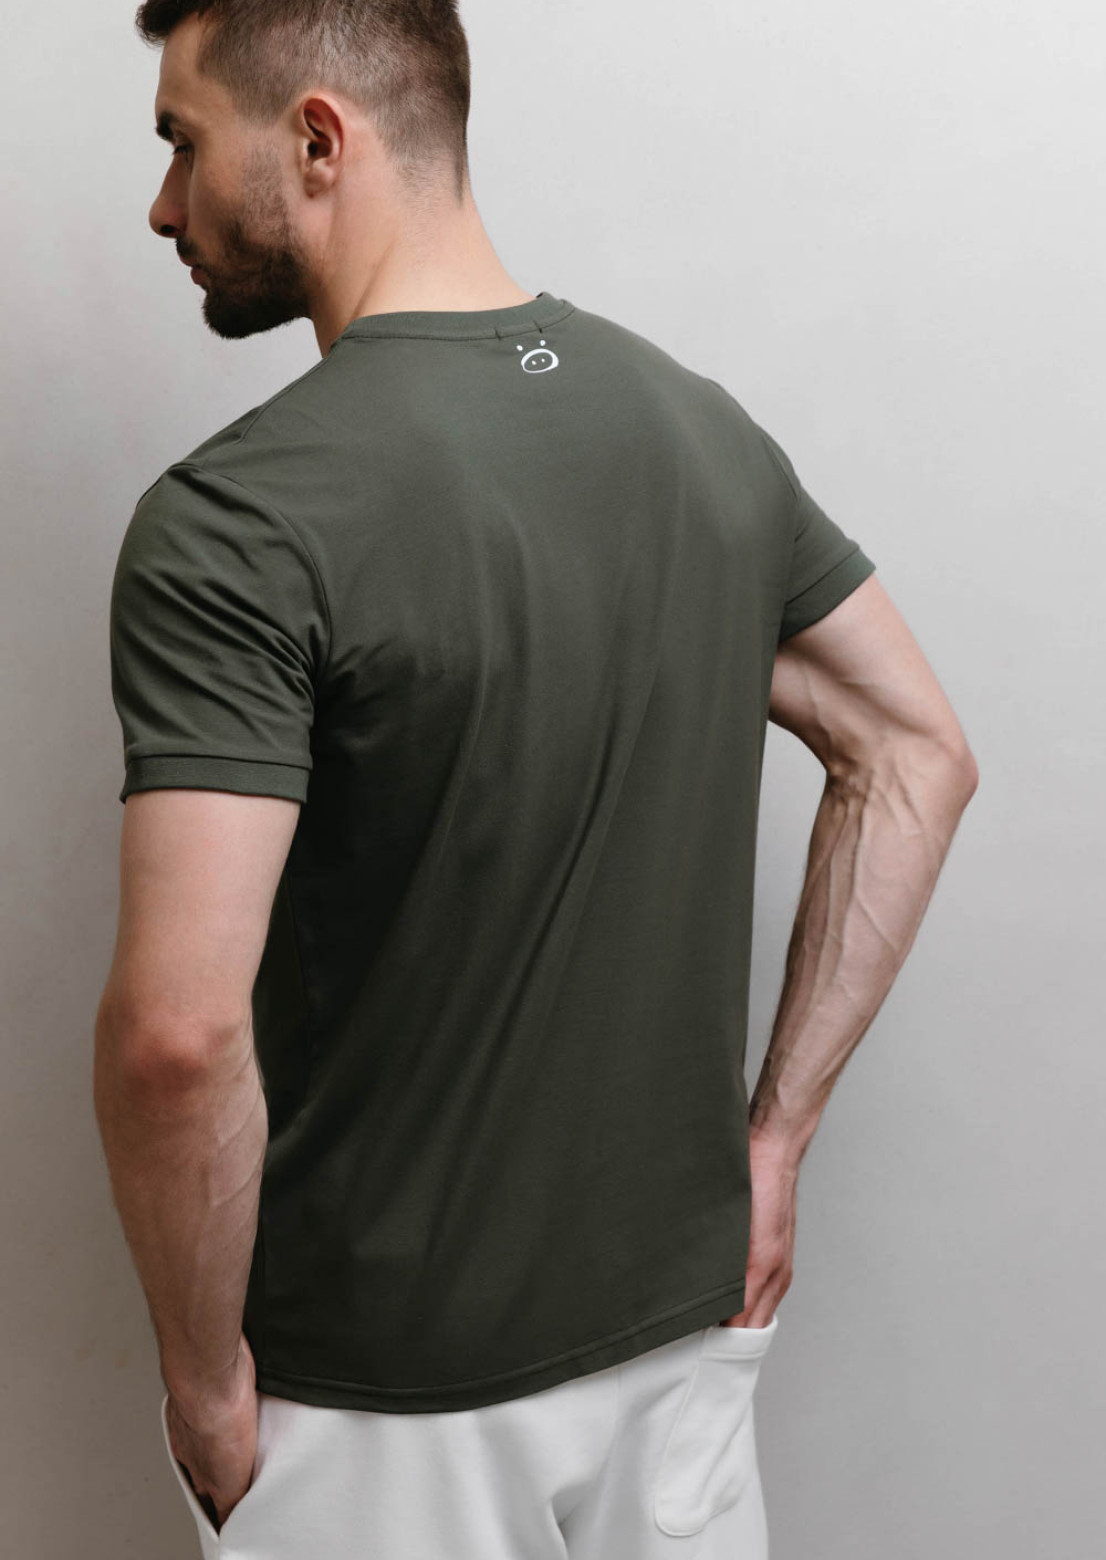 Khaki men's T-shirt with details on the sleeves